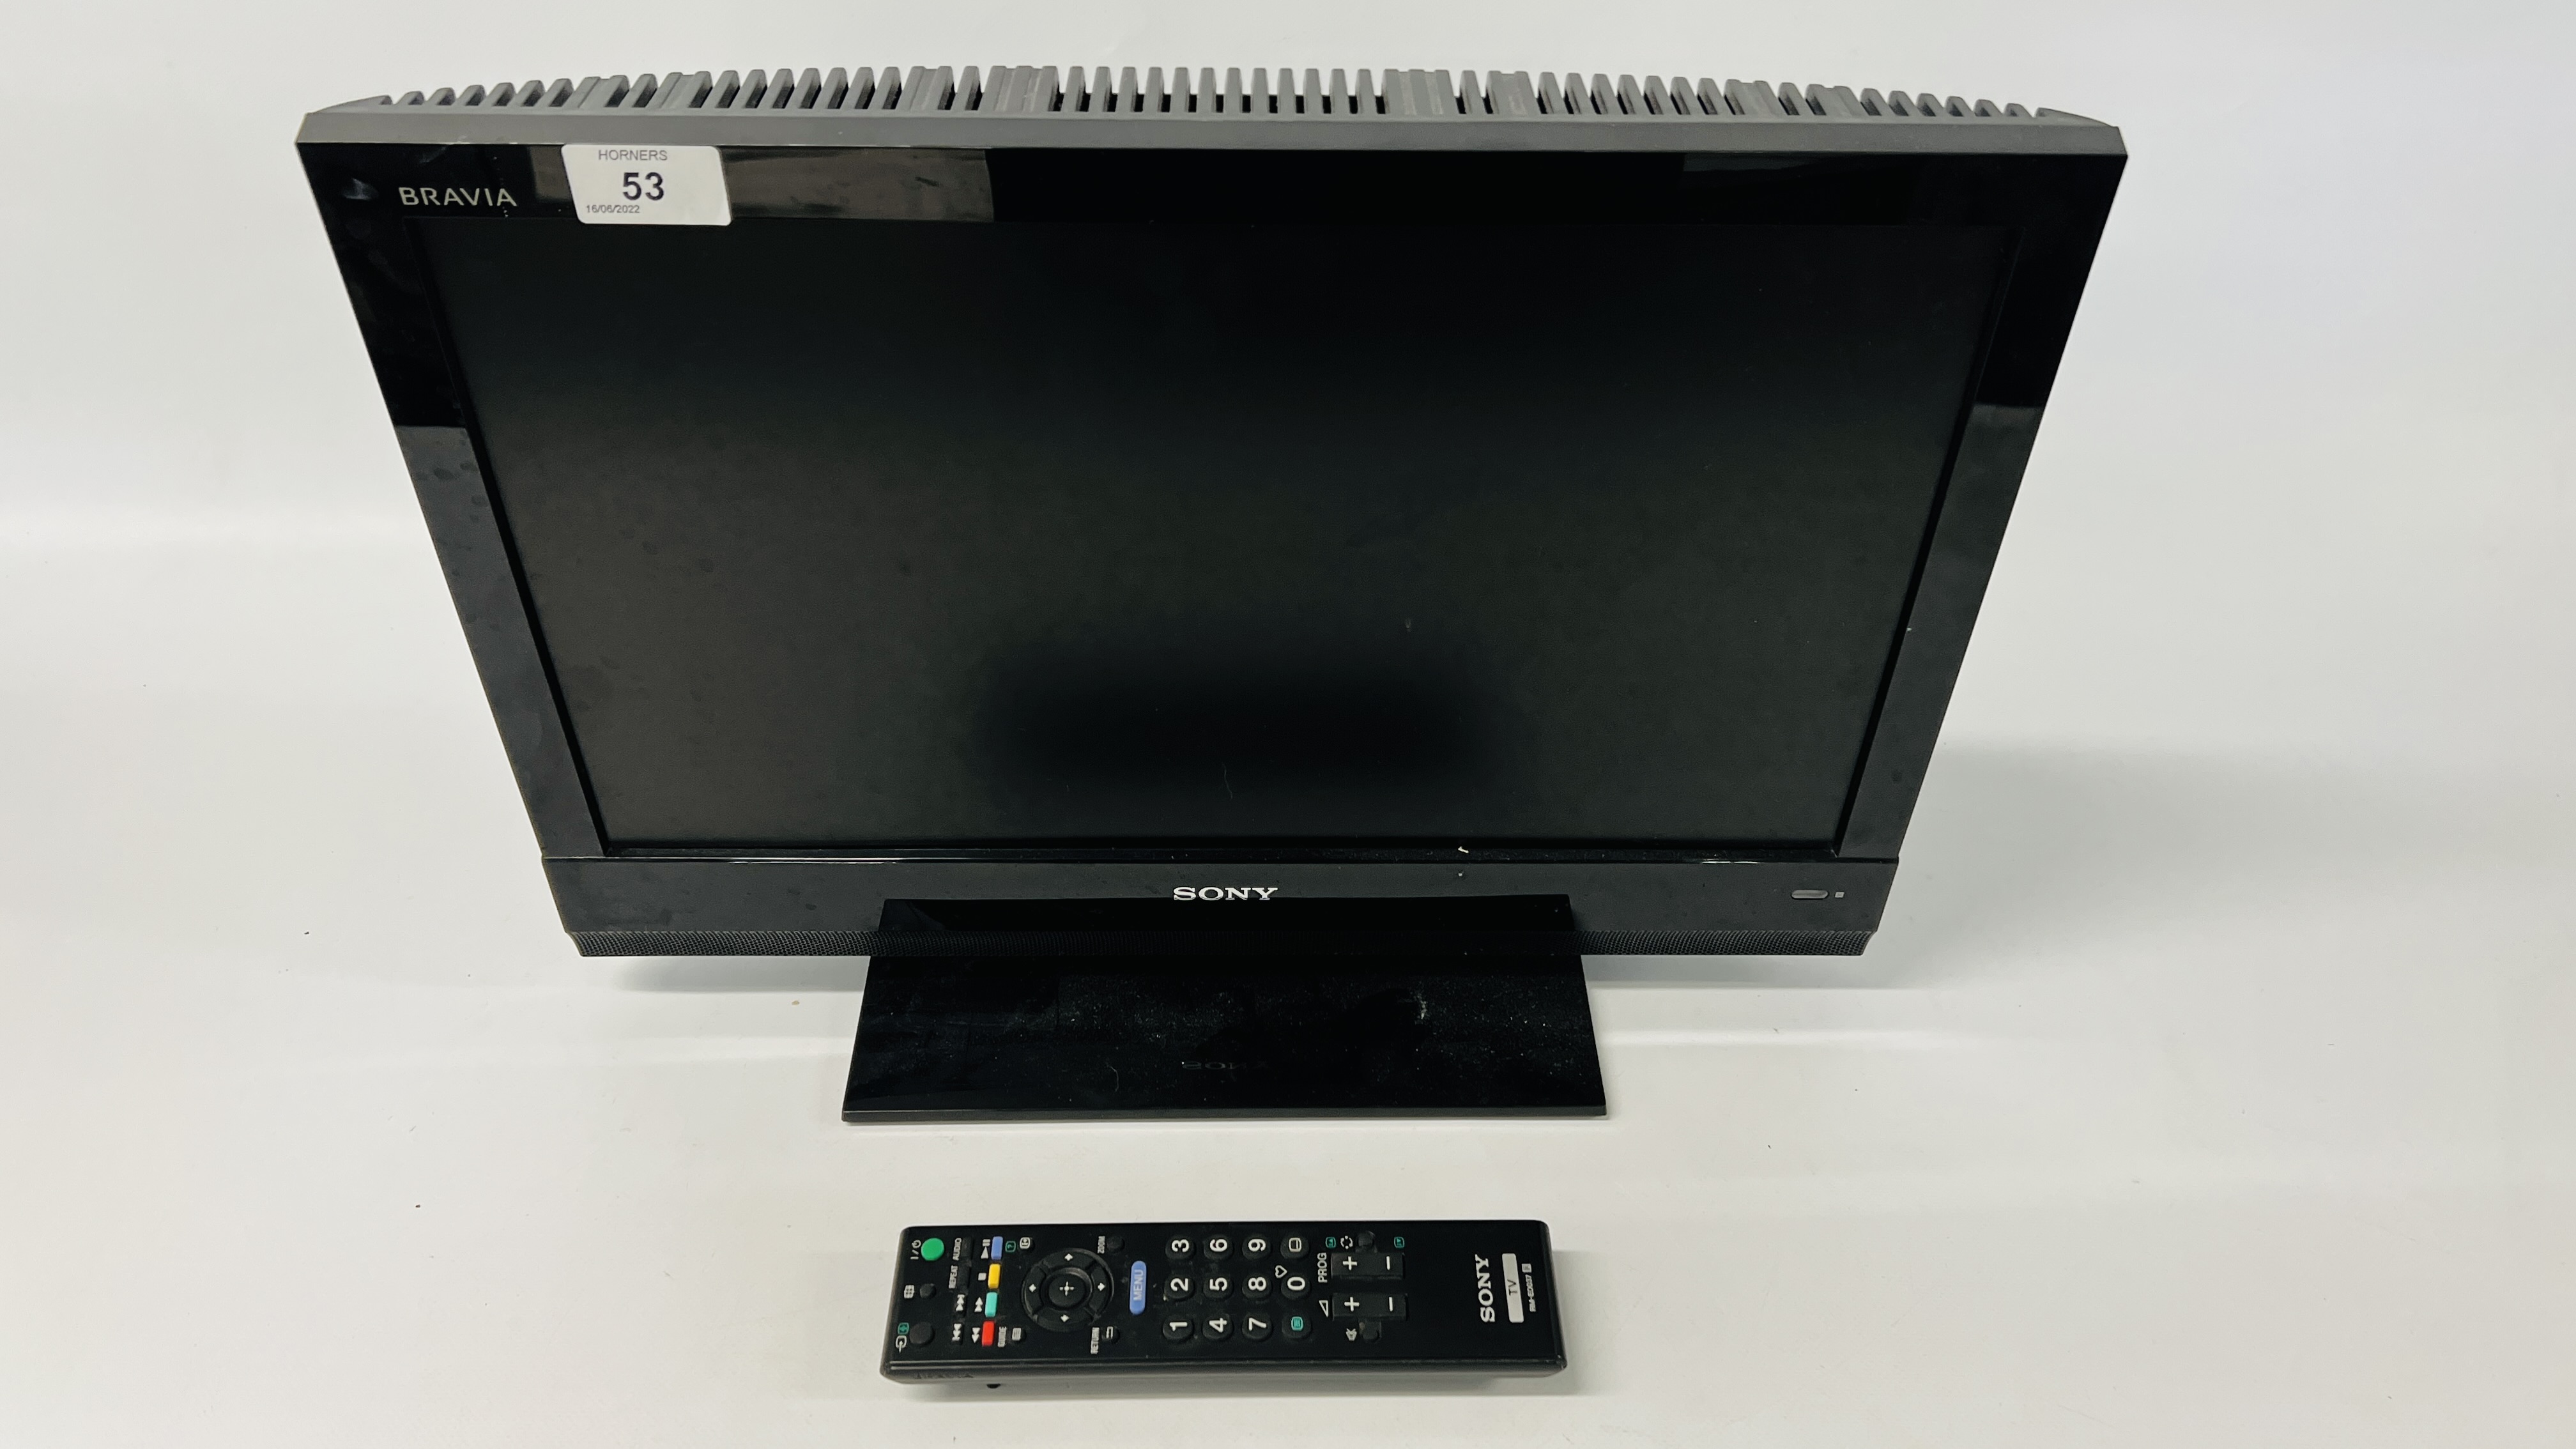 A SONY BRAVIA 19 INCH TELEVISION WITH REMOTE - SOLD AS SEEN